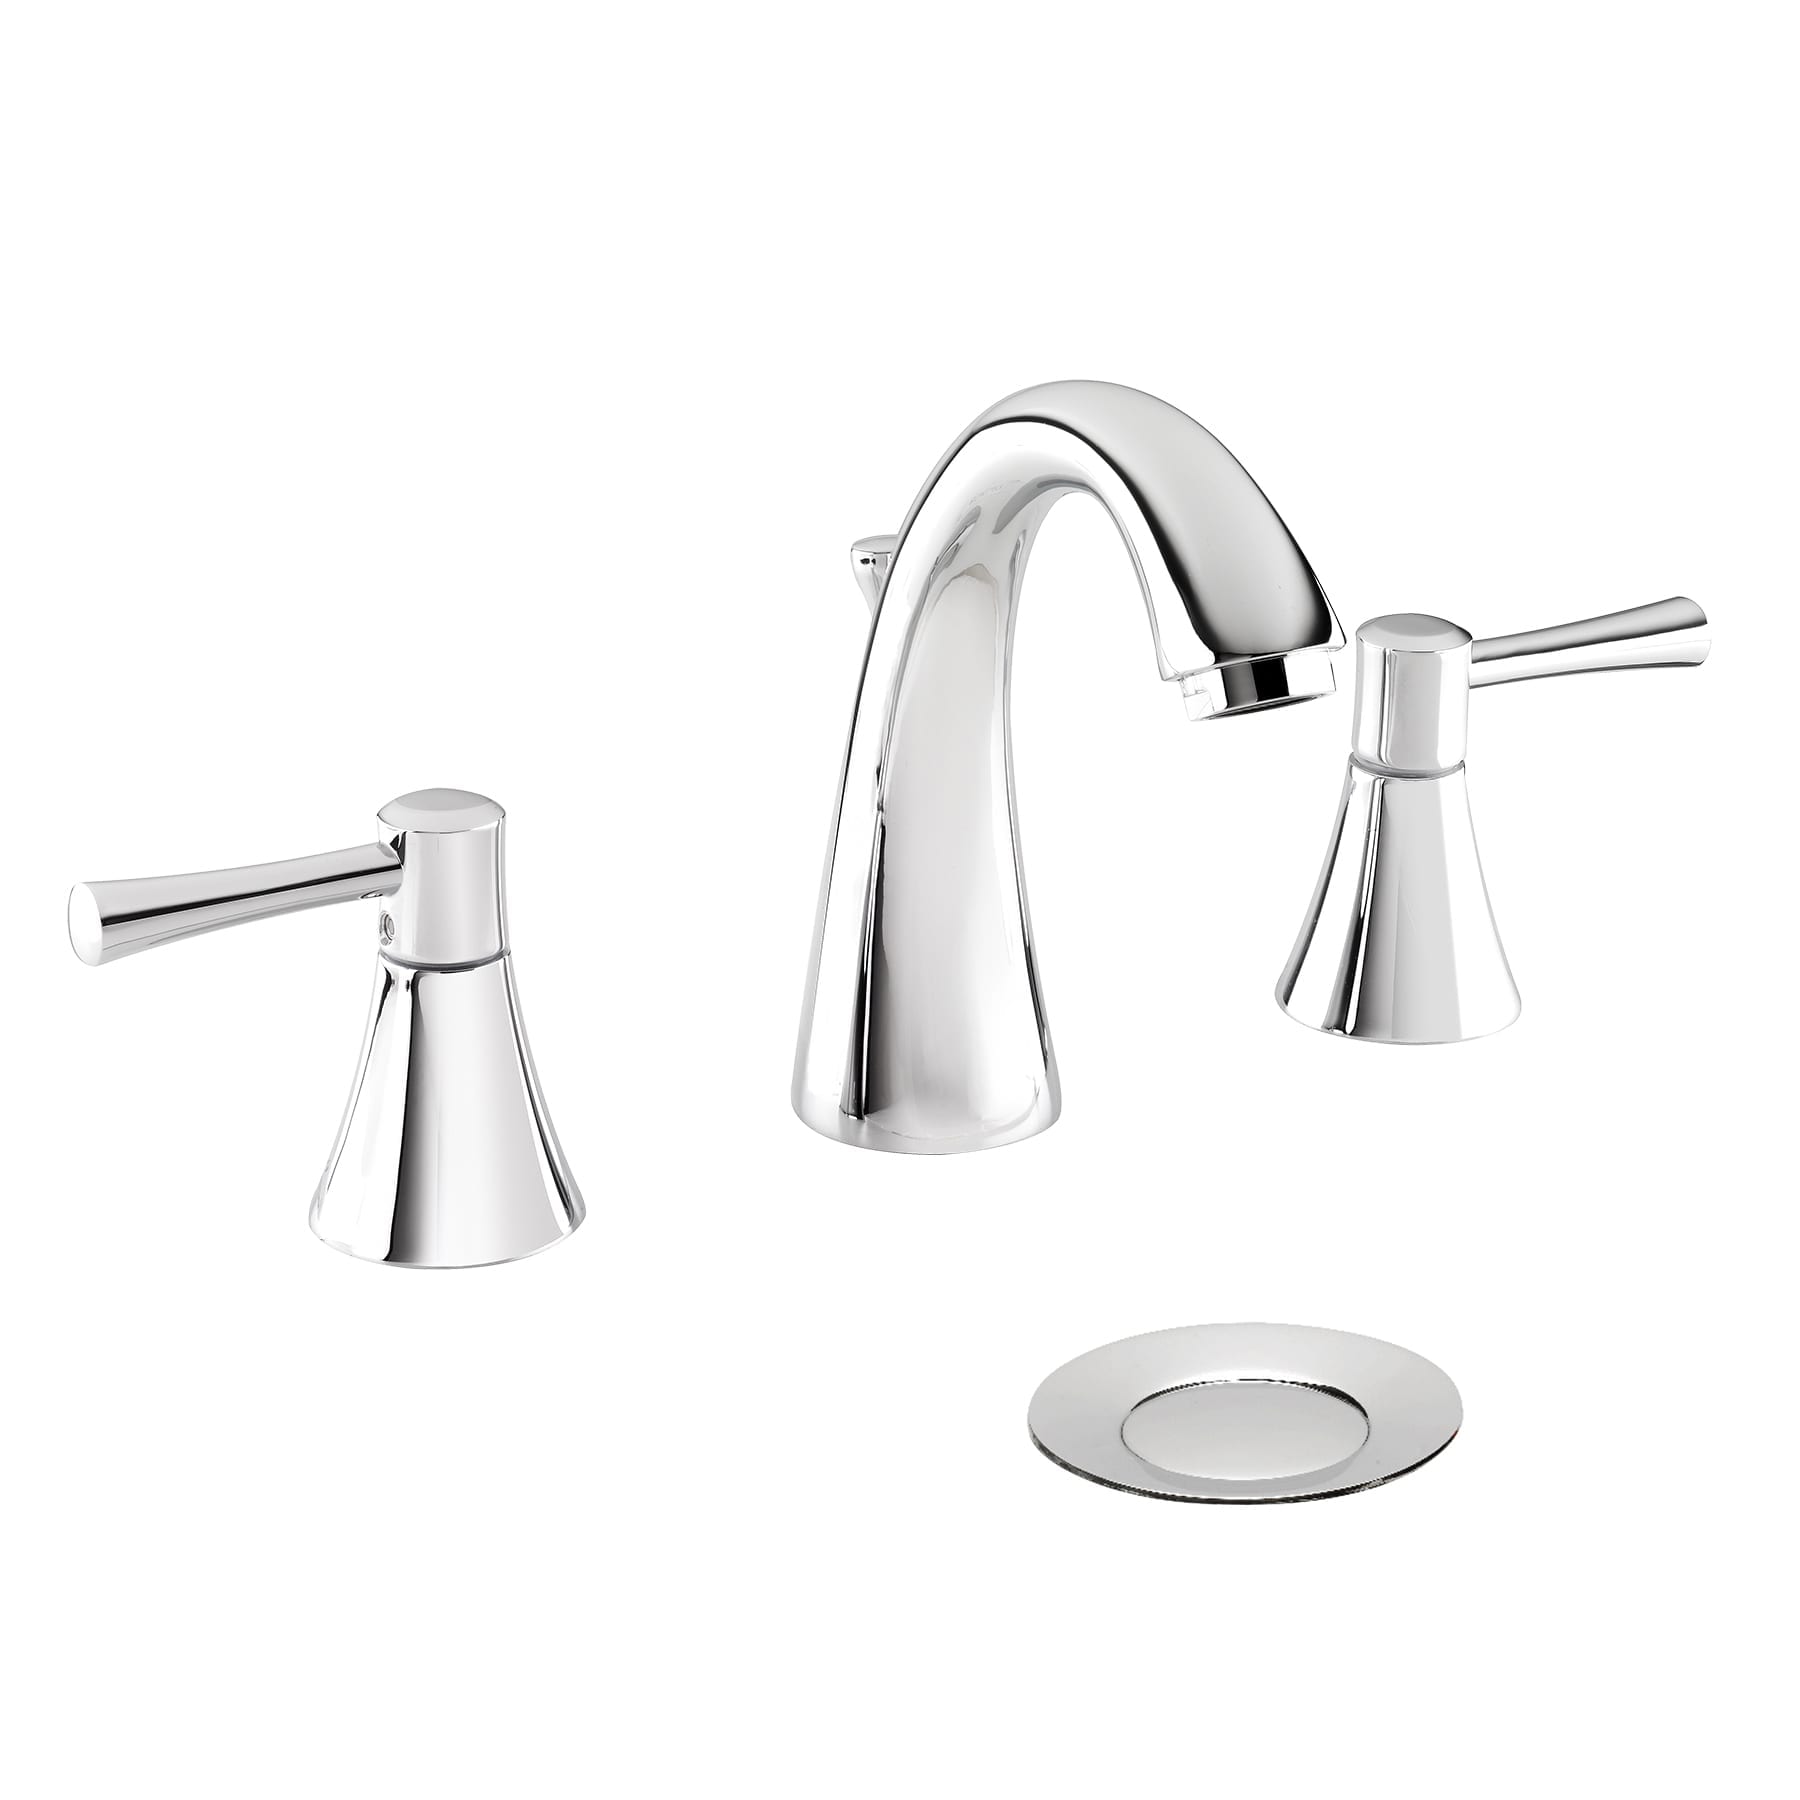 Neo79ccp Bathroom Sink Faucet With 2 Handles, Polished Chrome